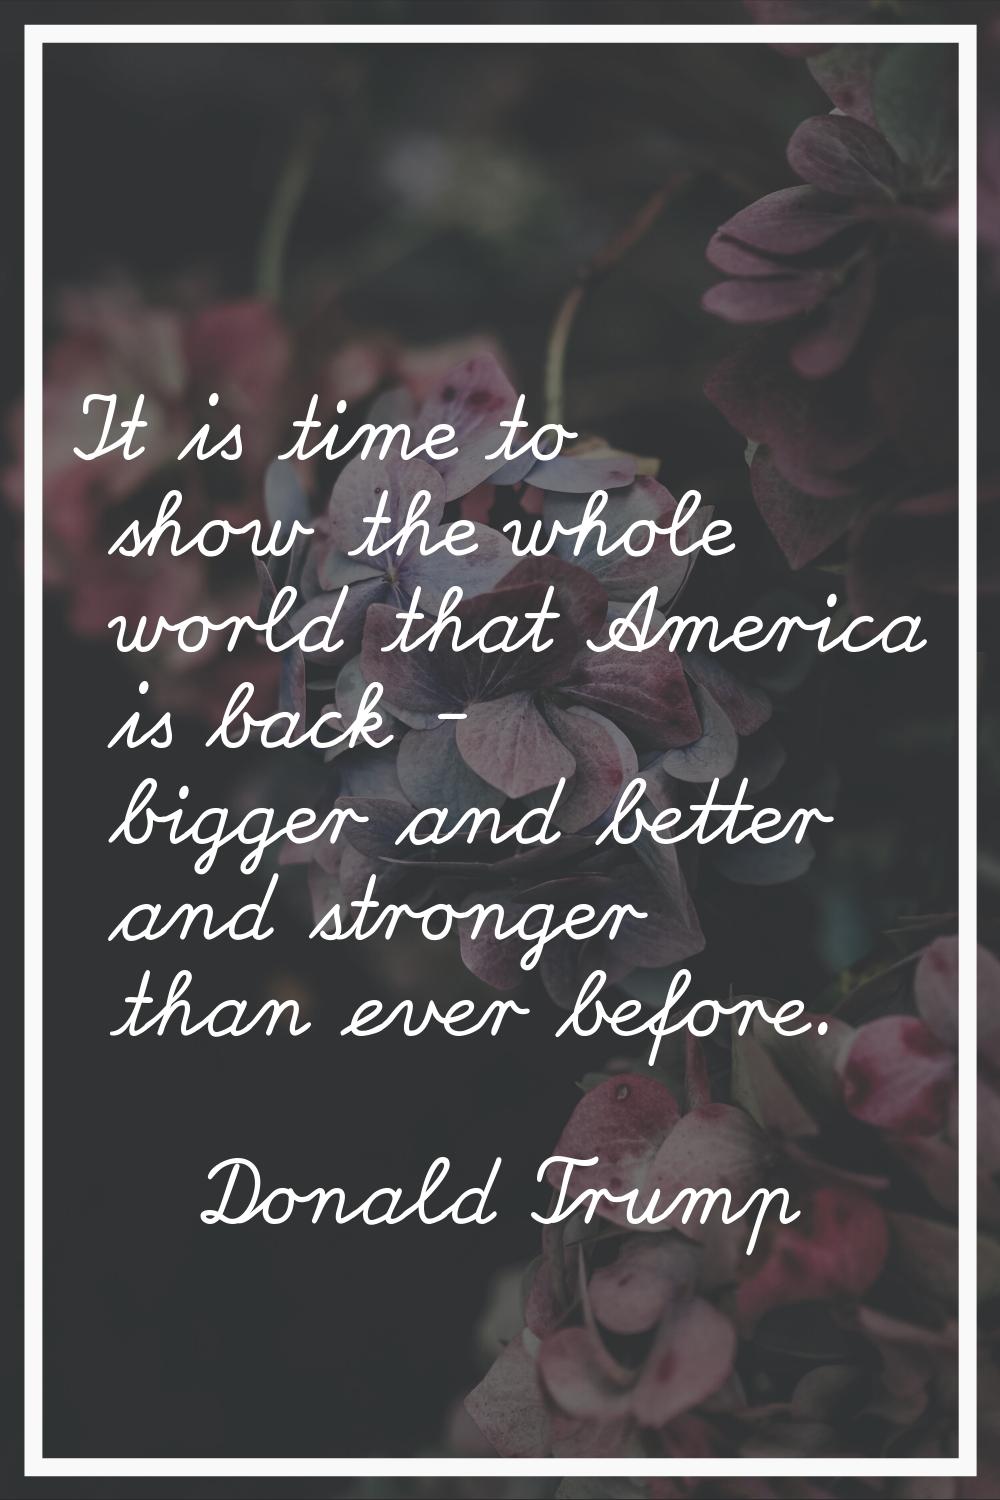 It is time to show the whole world that America is back - bigger and better and stronger than ever 